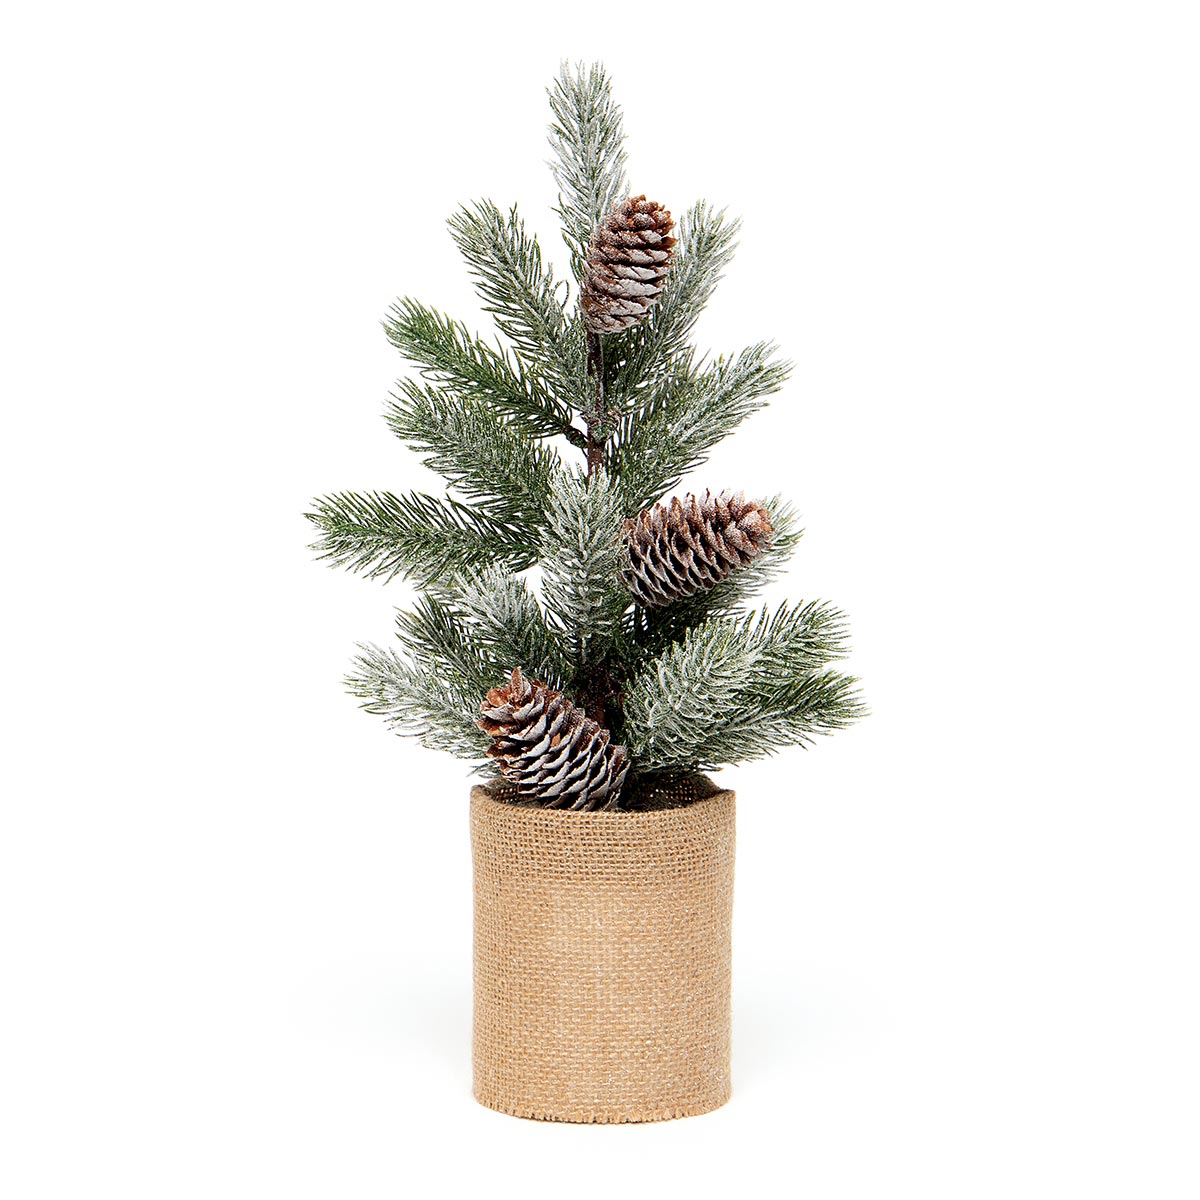 !SPRUCE PINE TREE IN BURLAP BASE WITH SNOW AND PINECONES